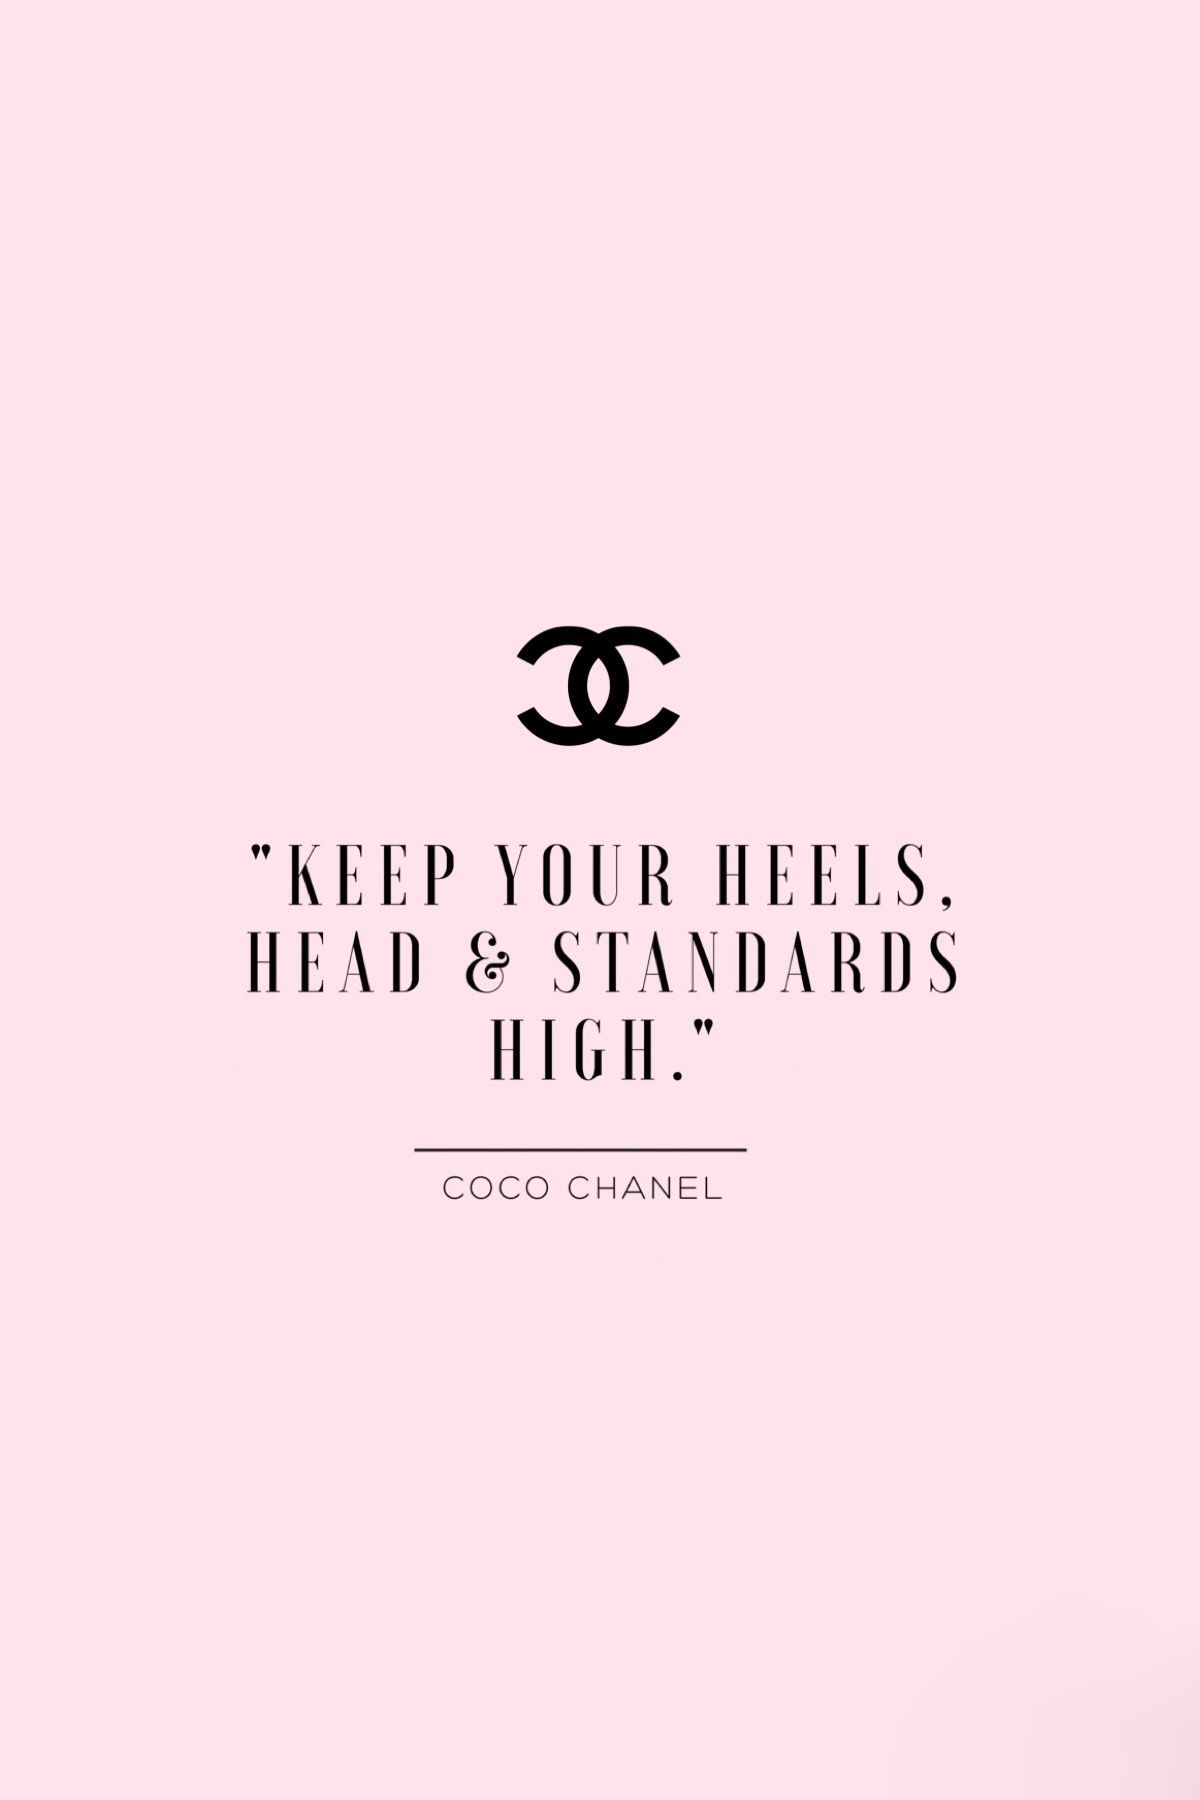 High Fashion Quotes Wallpapers